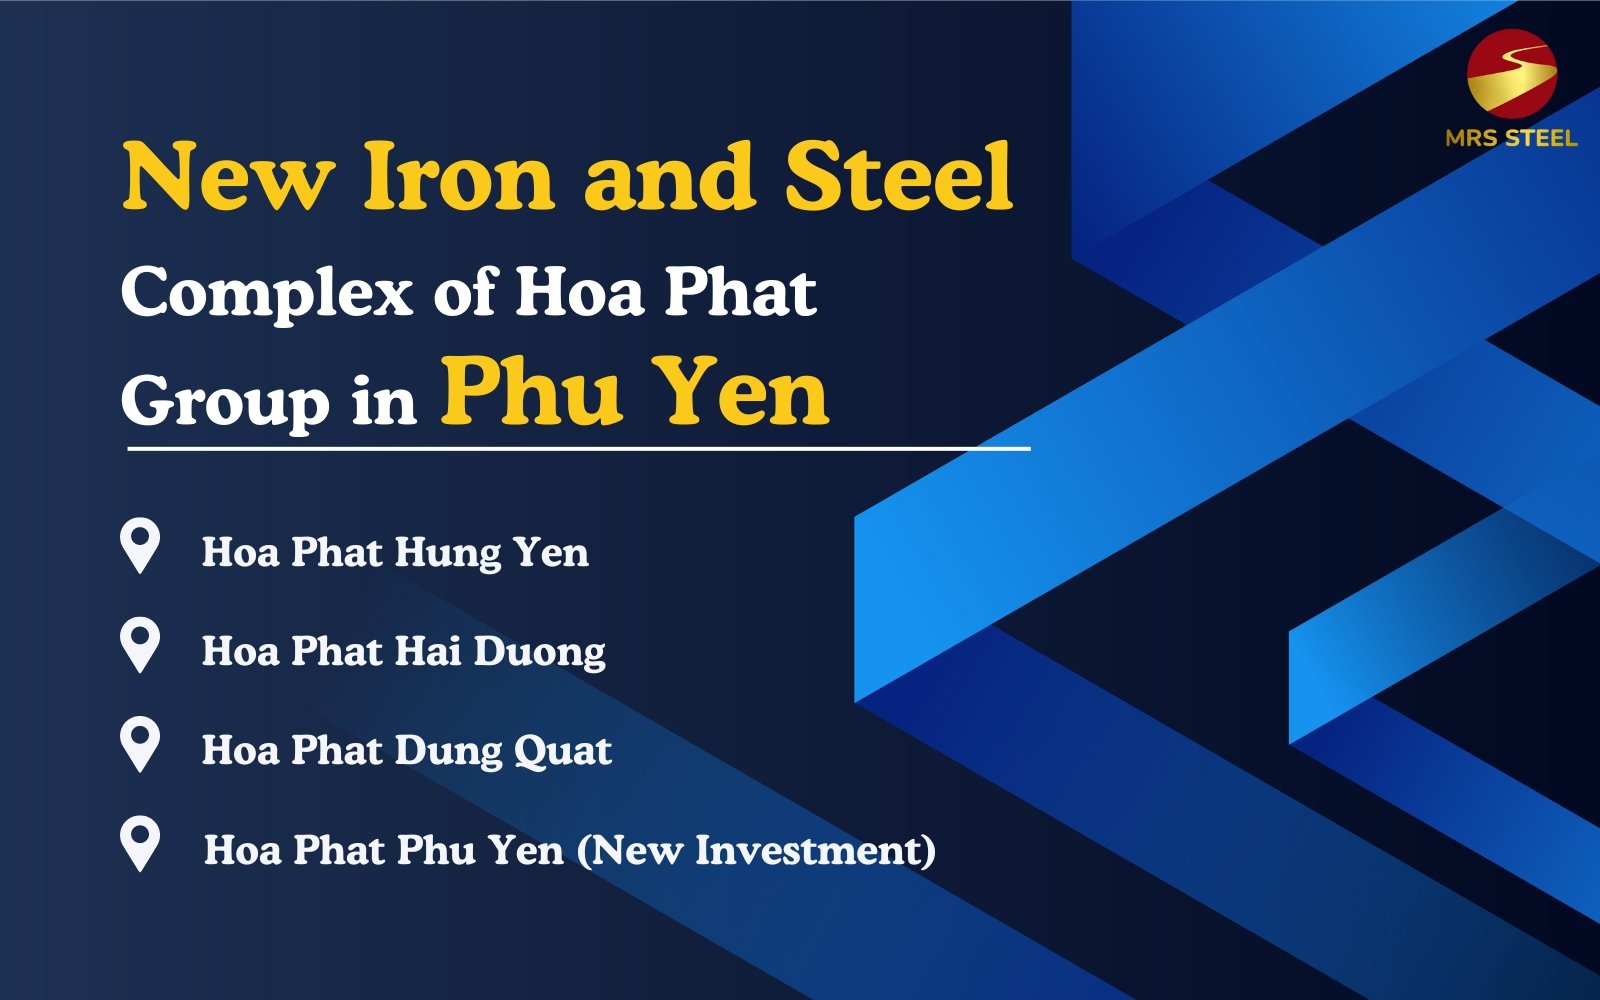 New Iron and Steel Complex of Hoa Phat Group in Phu Yen